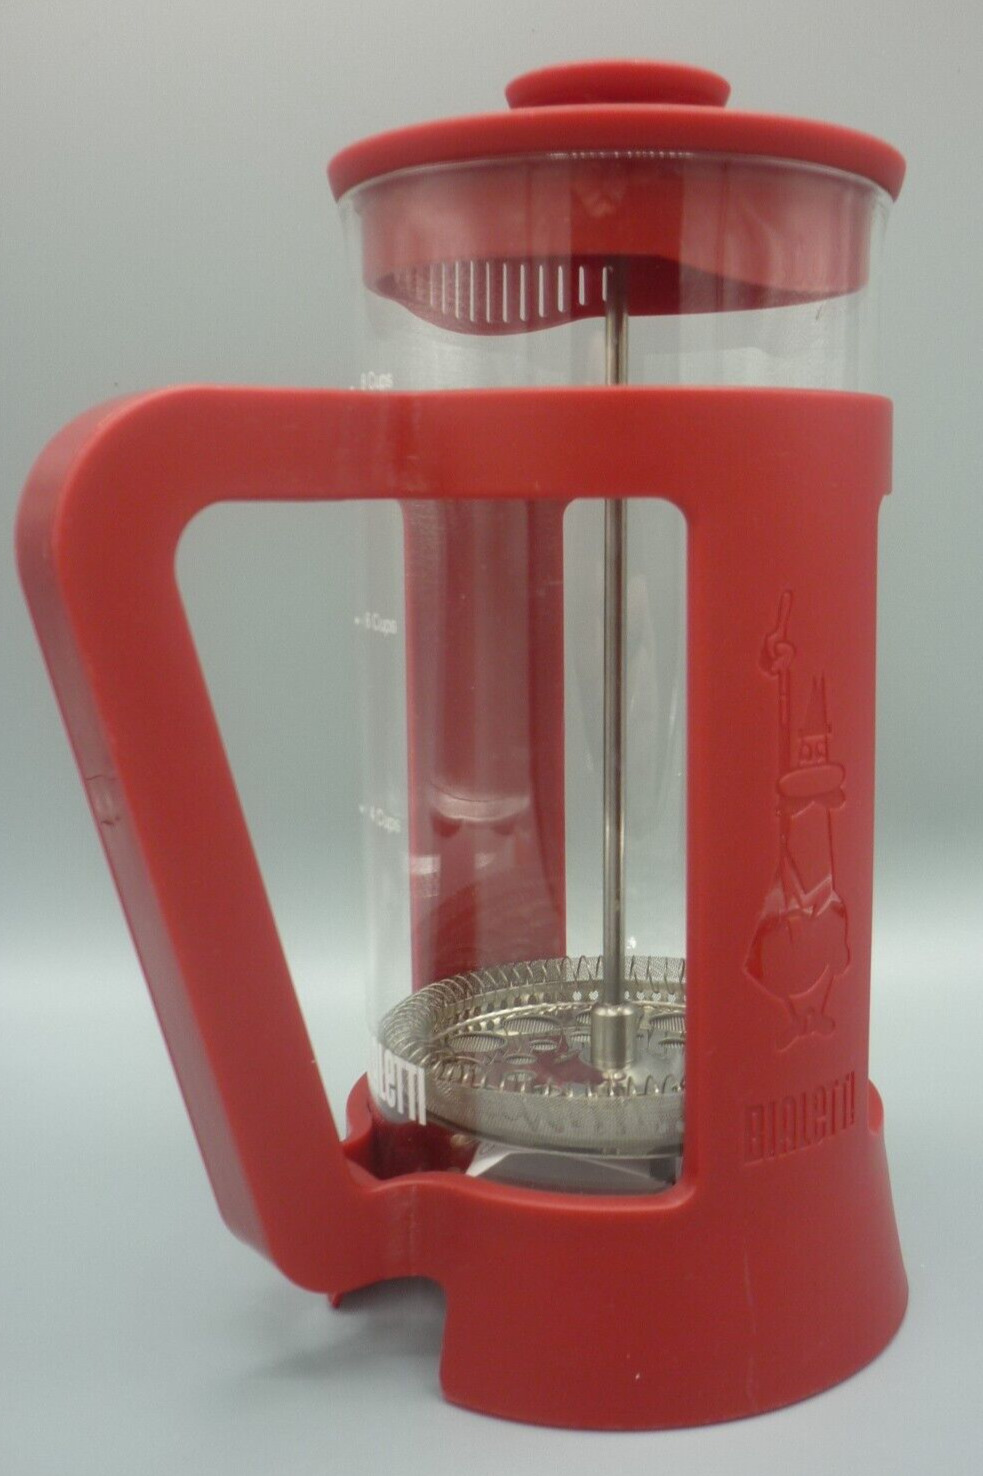 Bialetti FRENCH PRESS 8 Cups / 1L - RED Removable Glass Jar NEW